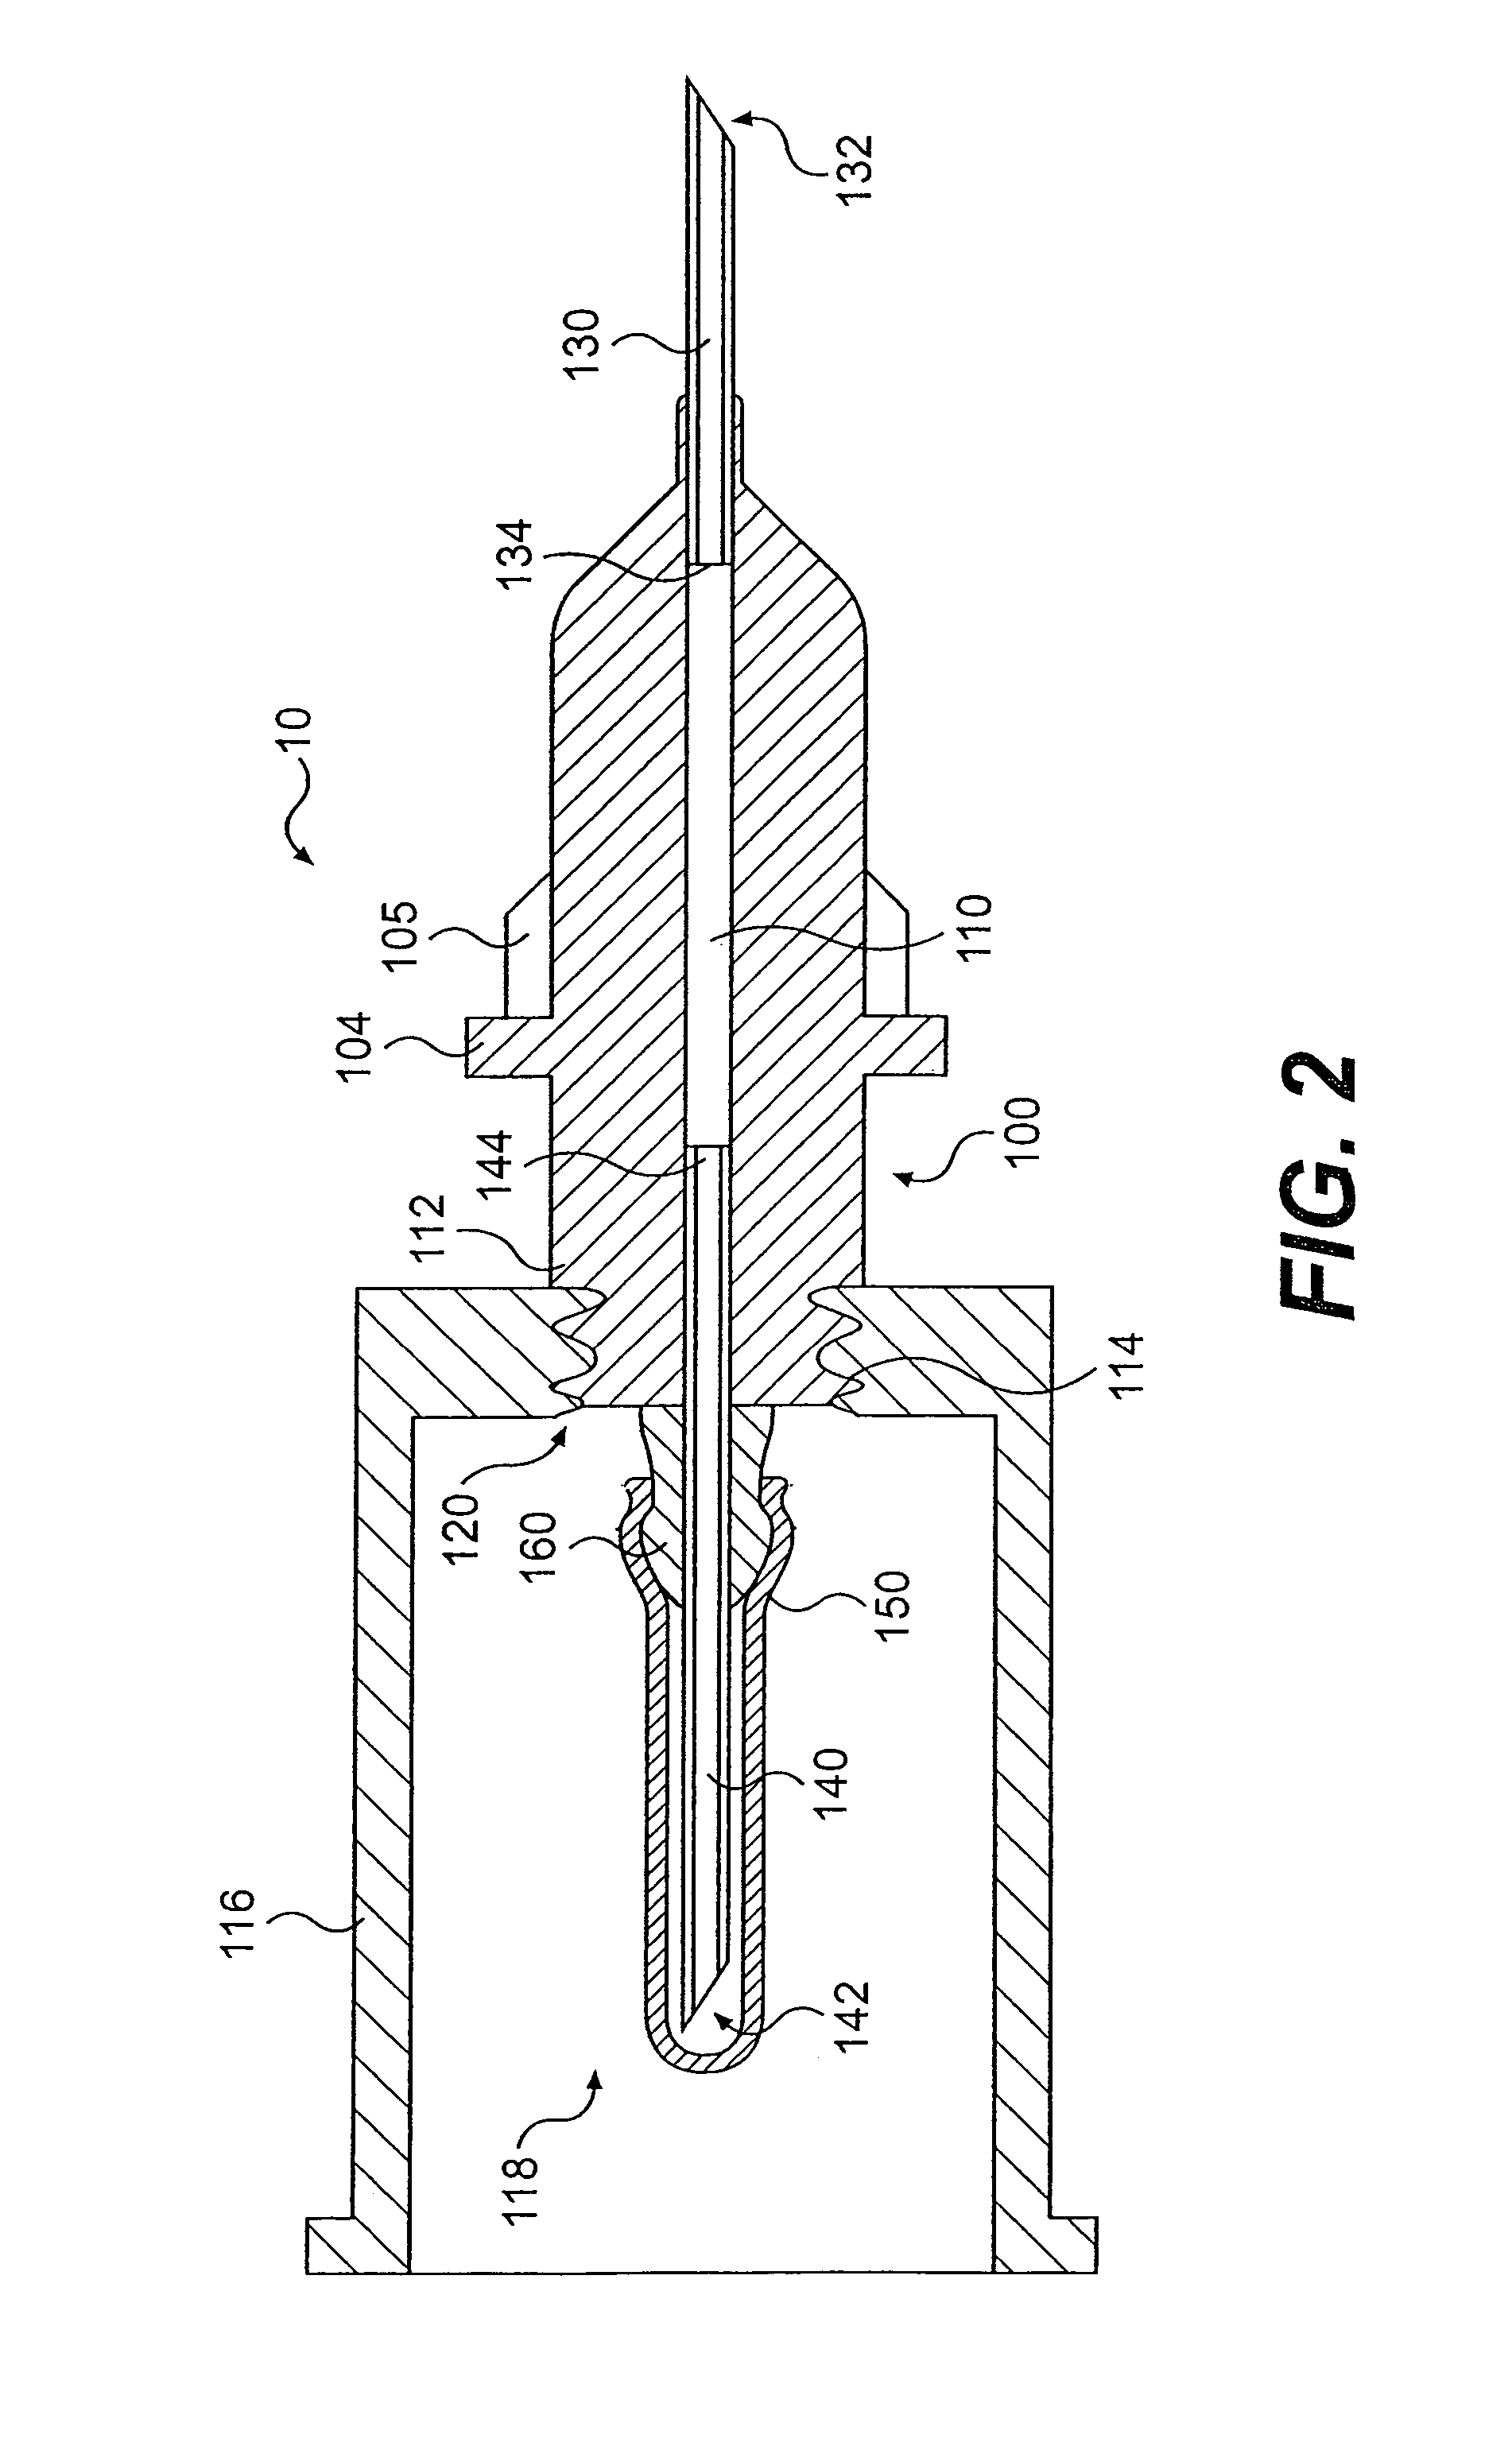 Porous multiple sample sleeve and blood drawing device for flash detection